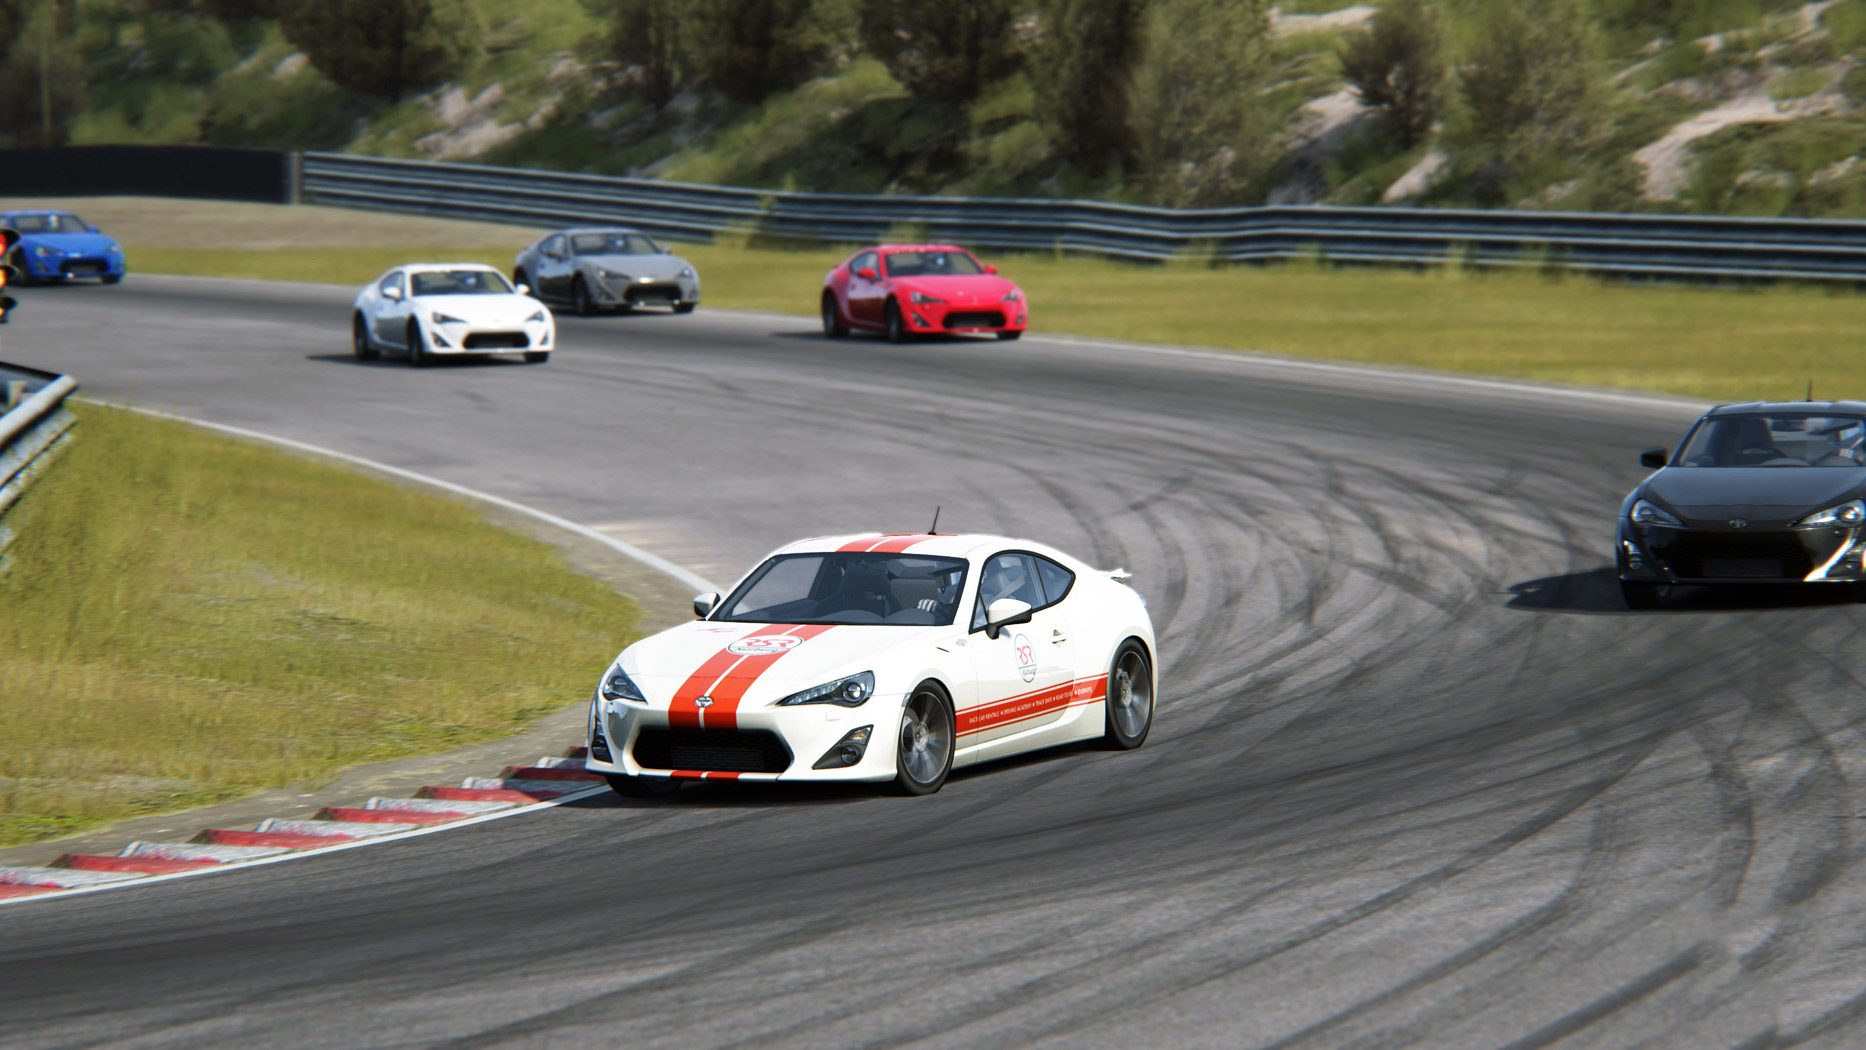 Assetto Corsa Racing Sim Adds Support For Vive Osvr Via Native Openvr Road To Vr